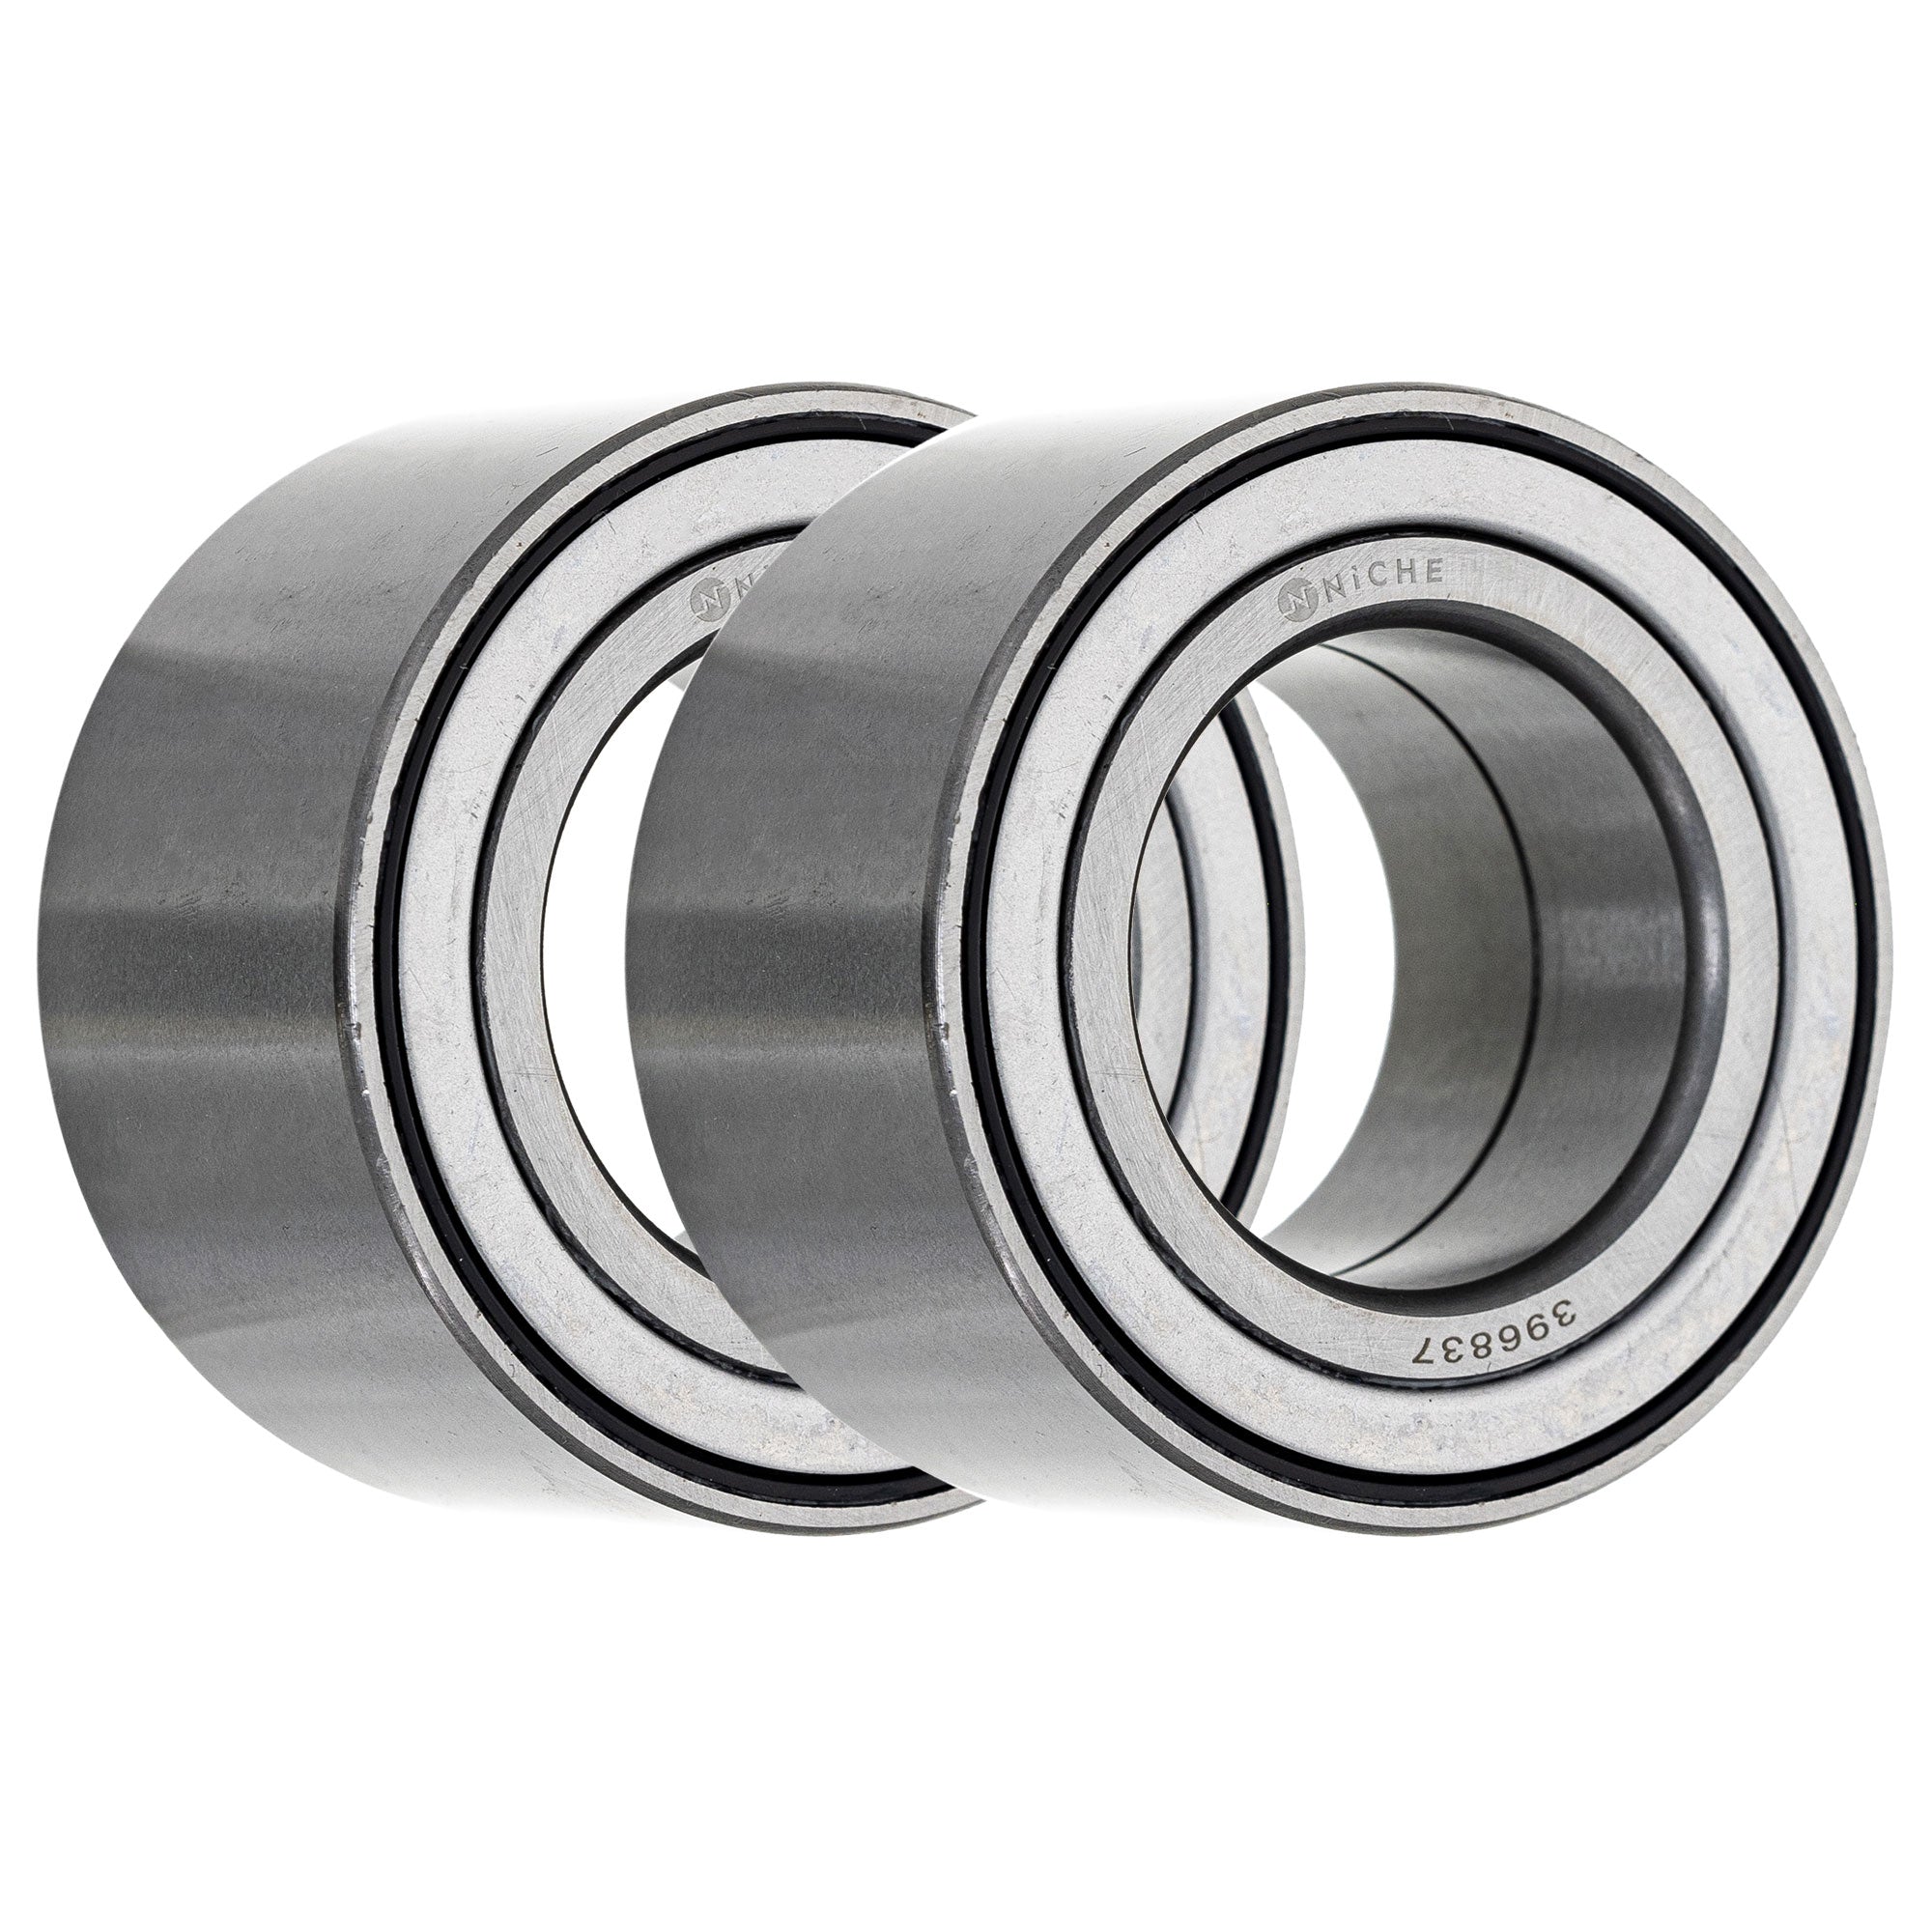 Double Row, Angular Contact, Ball Bearing Pack of 2 2-Pack for zOTHER NICHE 519-CBB2204R